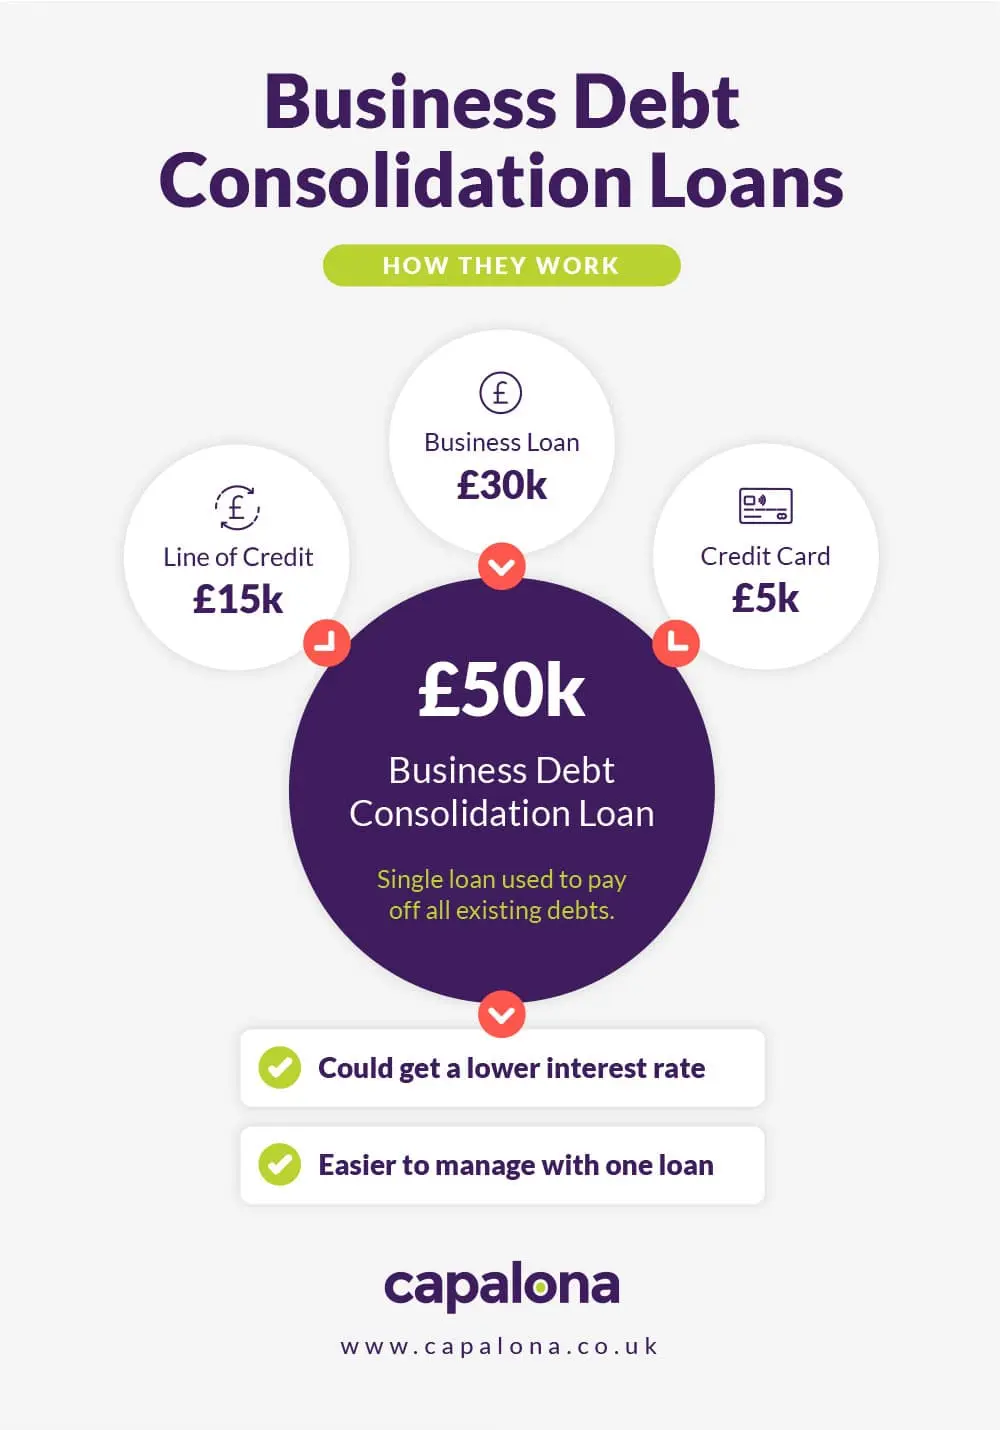 How do business debt consolidation loans work?